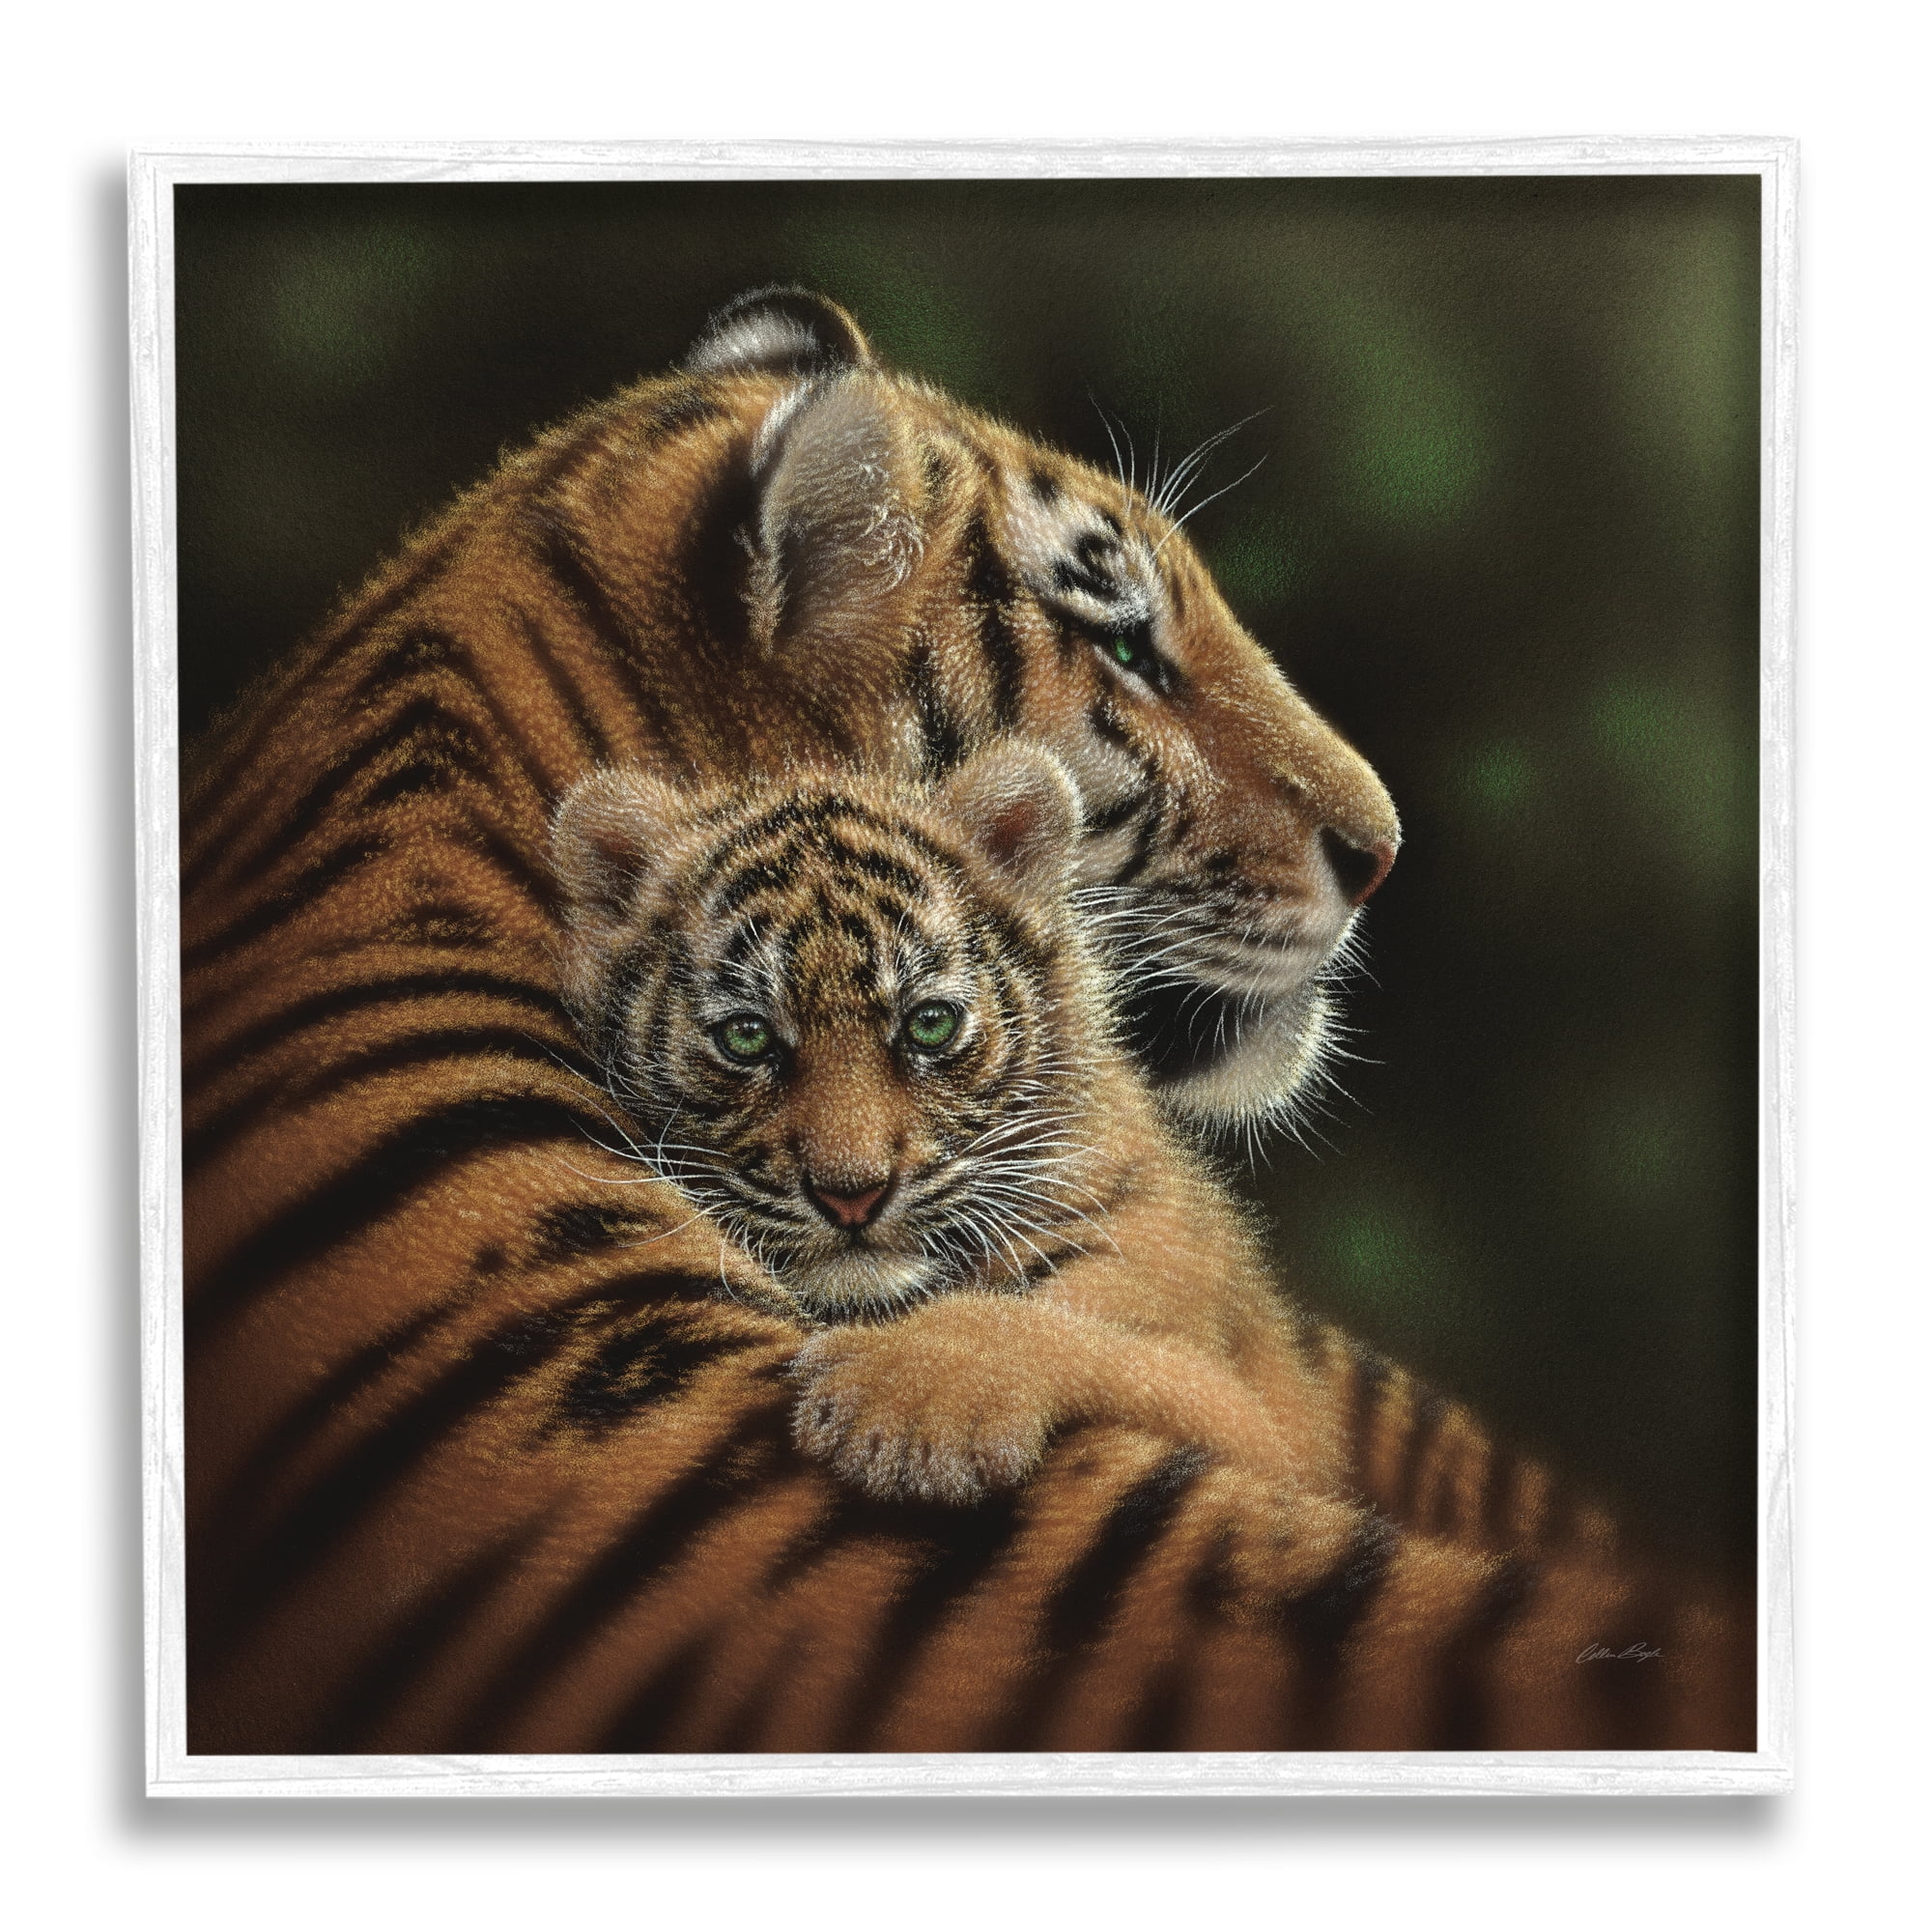  Stupell Industries Adorable Sweet Mom Tiger Holding Baby Cub  Detailed Portrait, Design by Collin Bogle : Everything Else